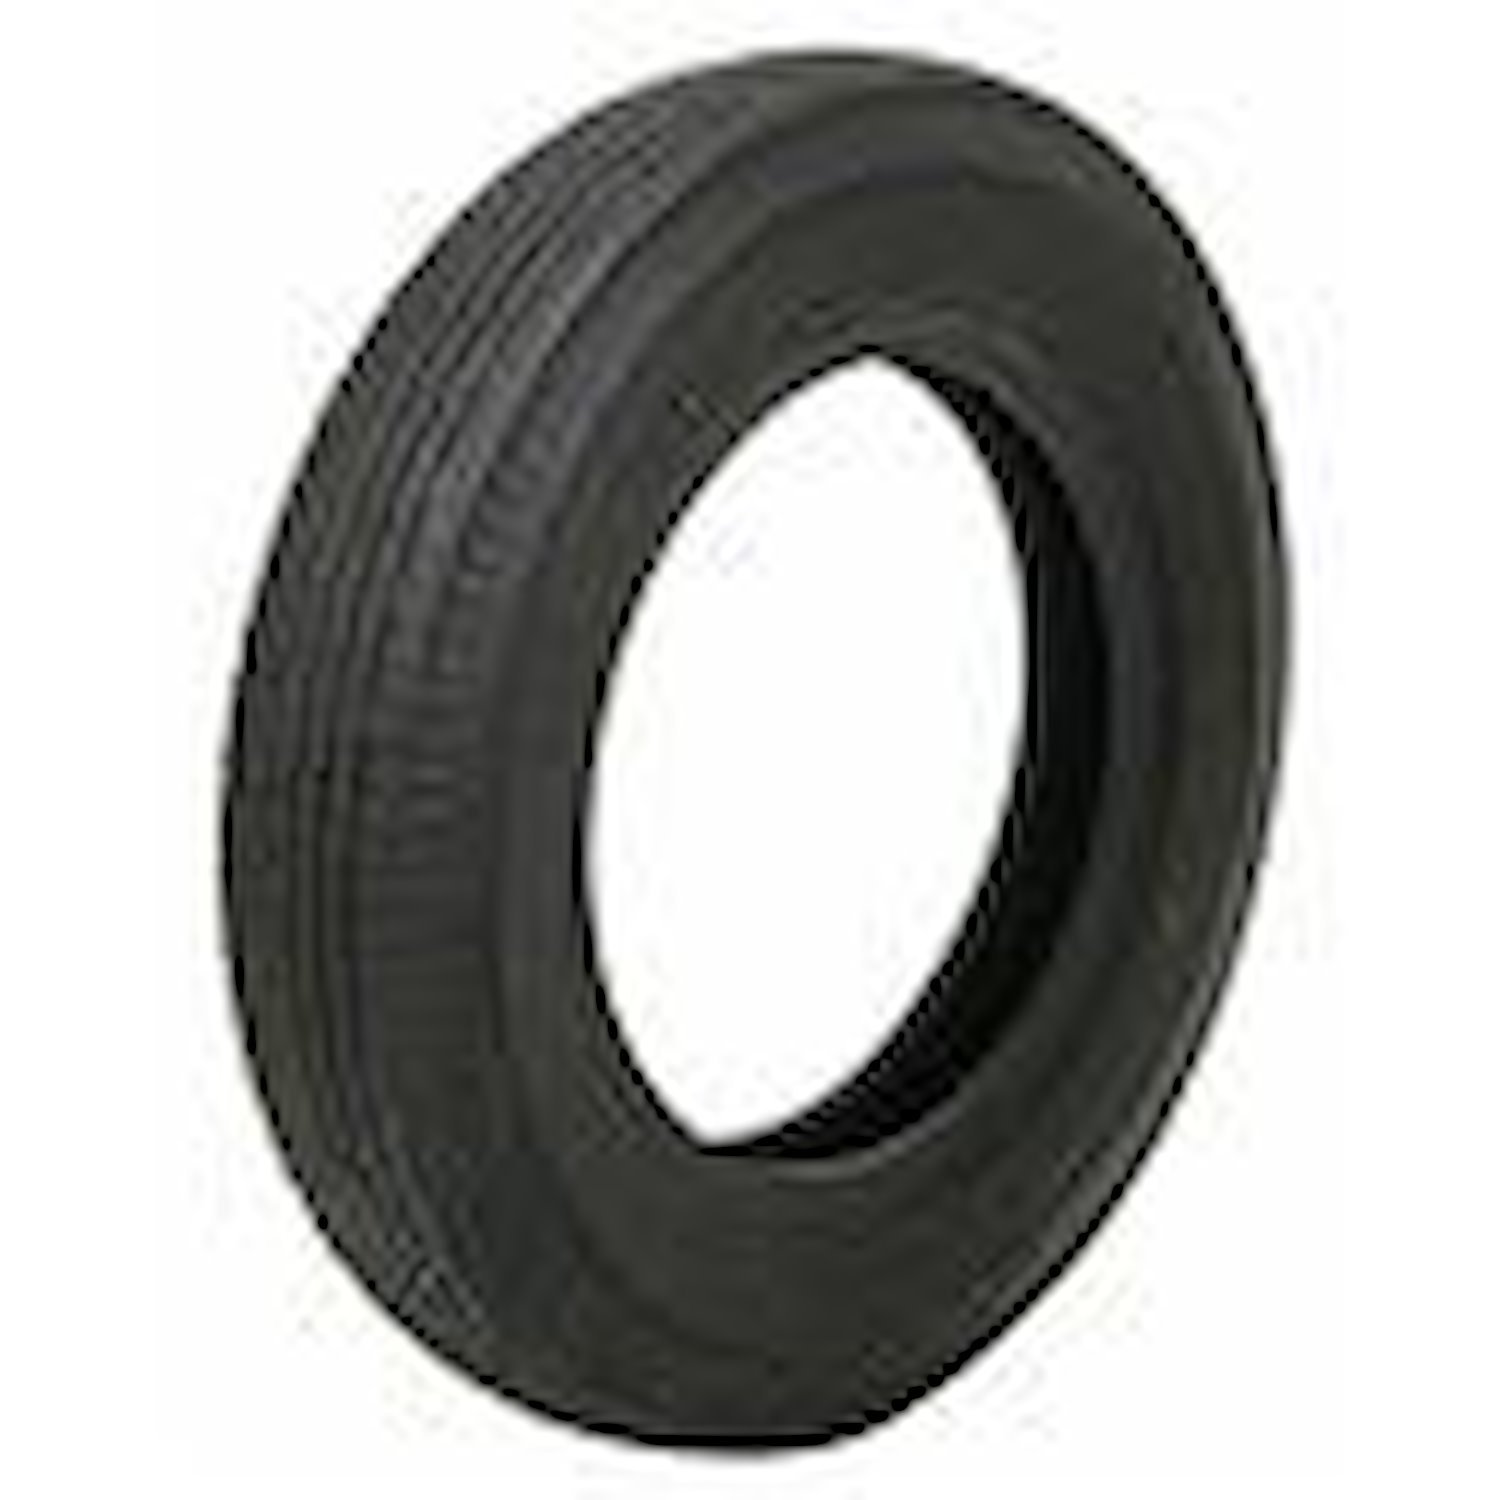 61975 Tire, Excelsior, 500/520-14